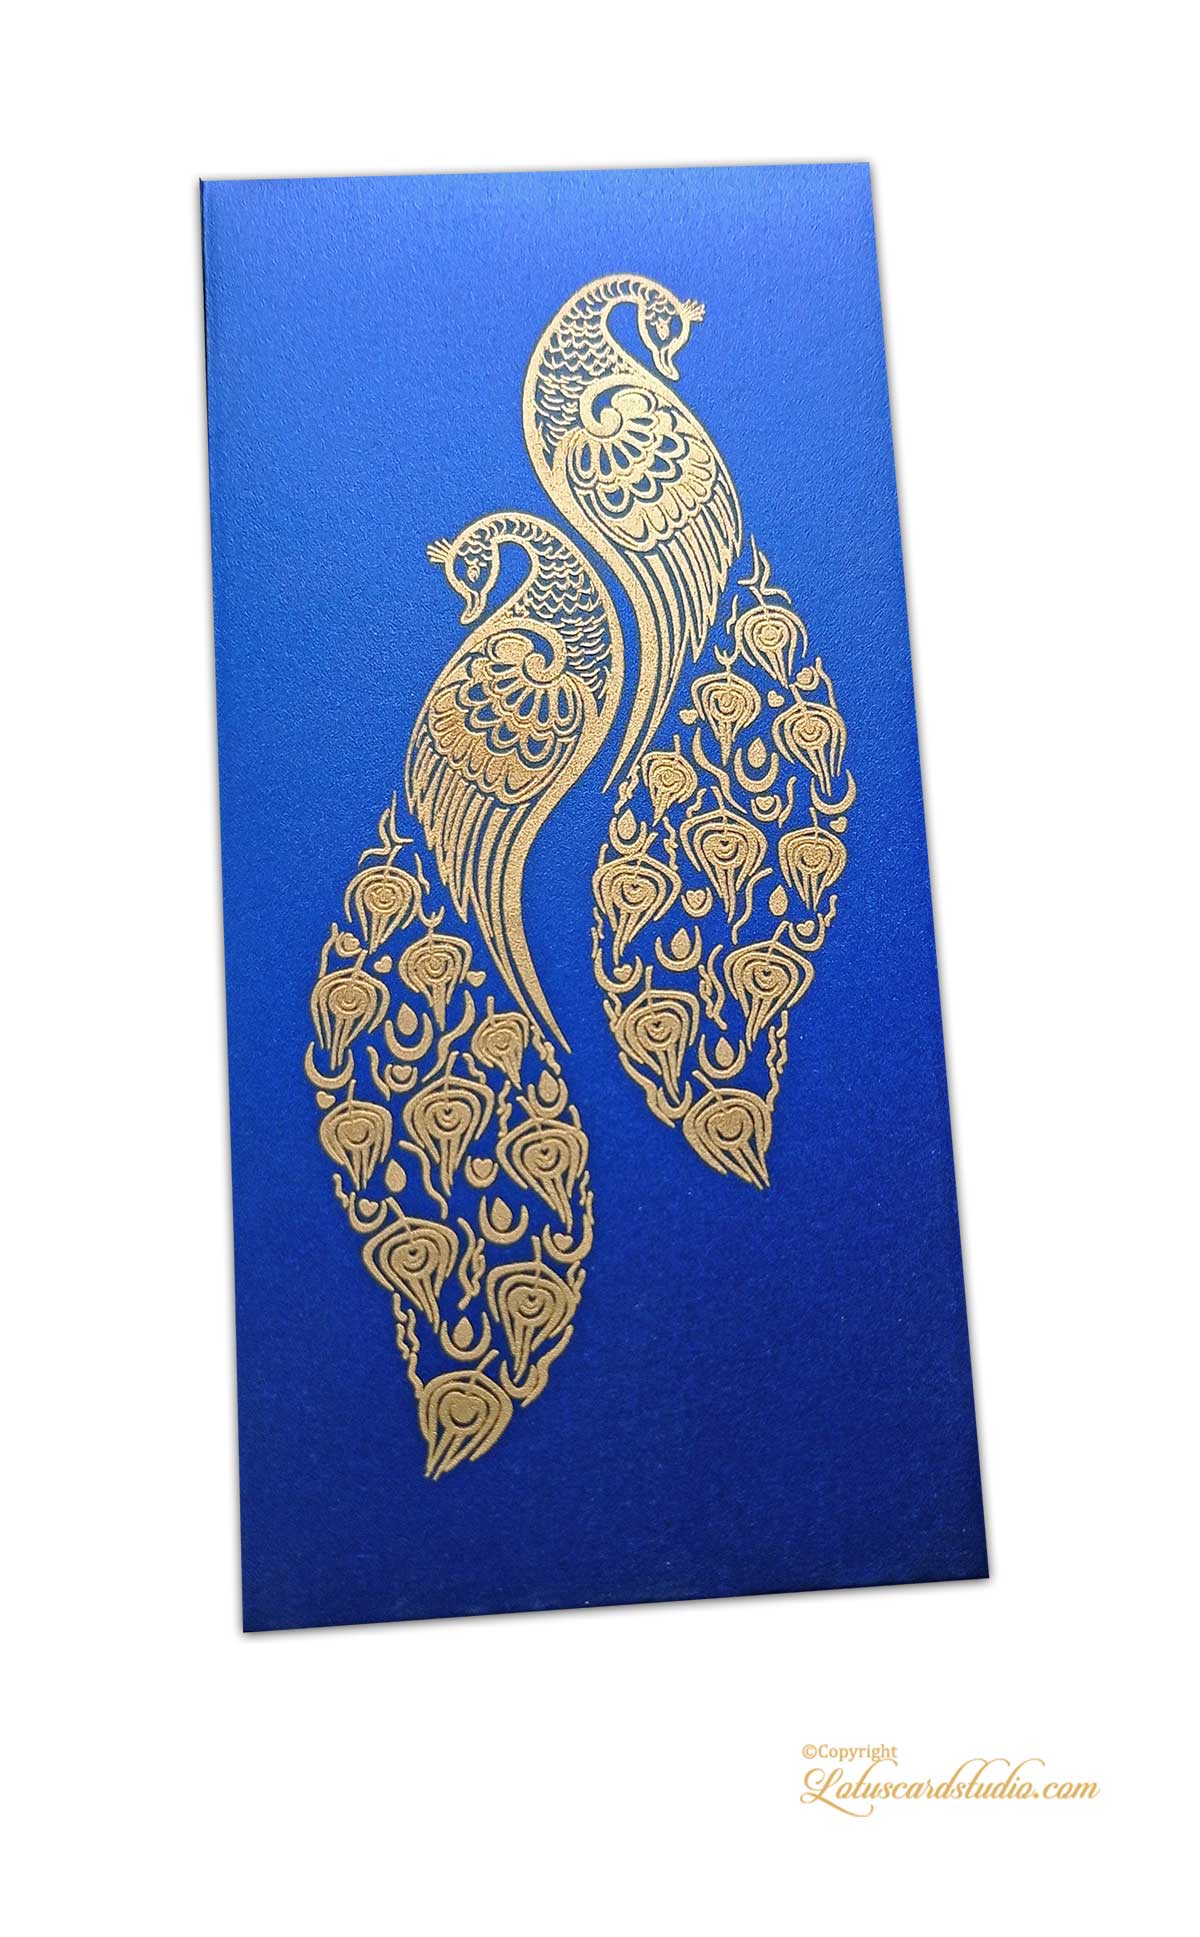 Shagun Envelope with Golden Peacocks on Imperial Blue Background